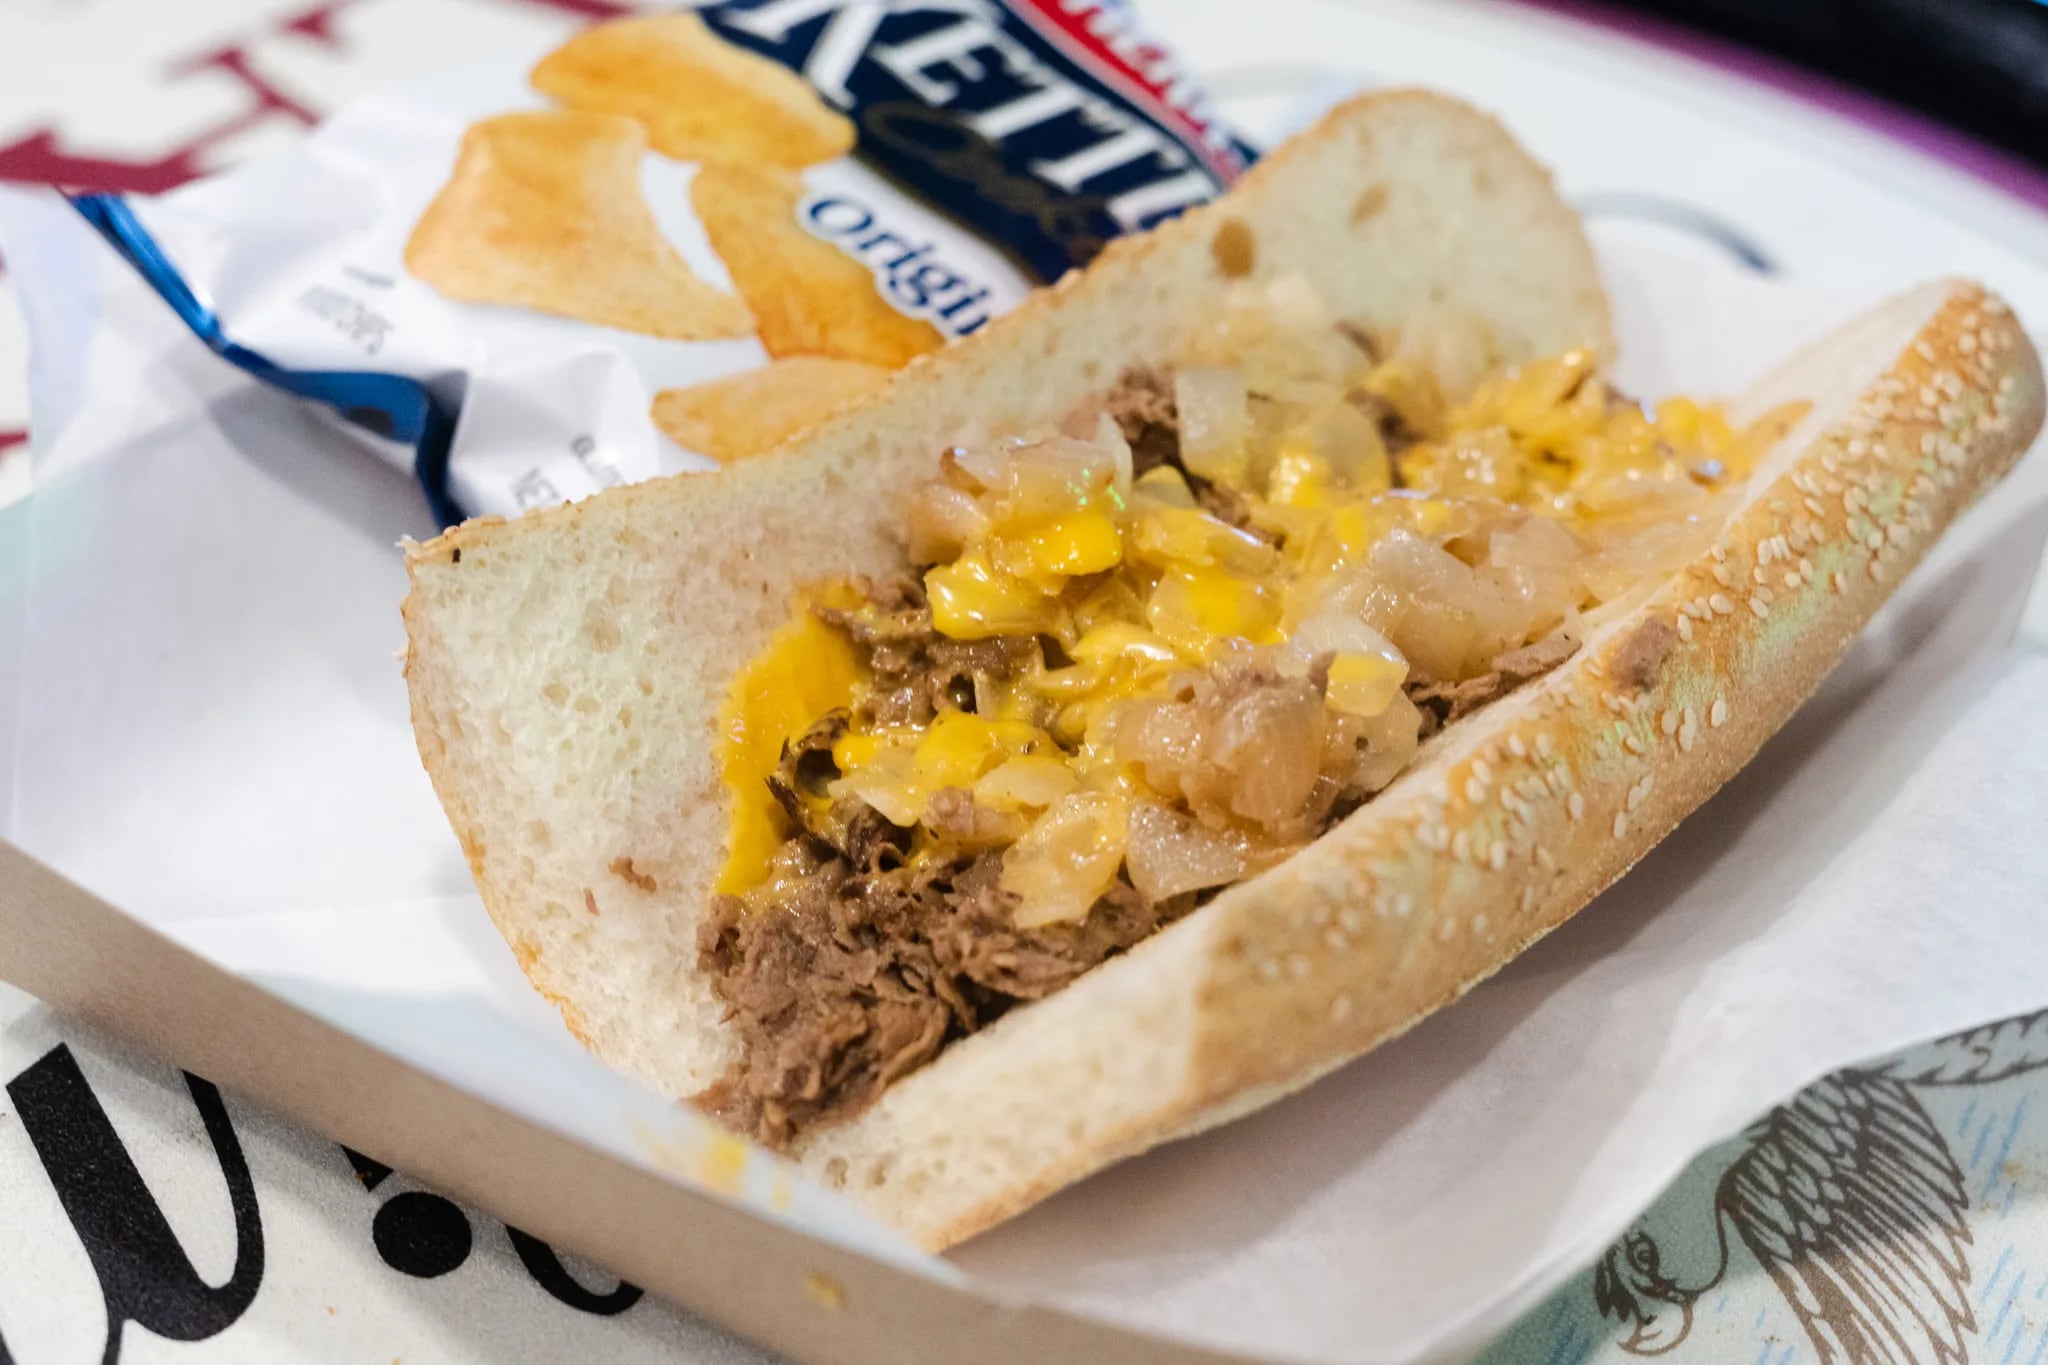 A cheesesteak from Uncle Charlie's Steaks at Citizens Bank Park.